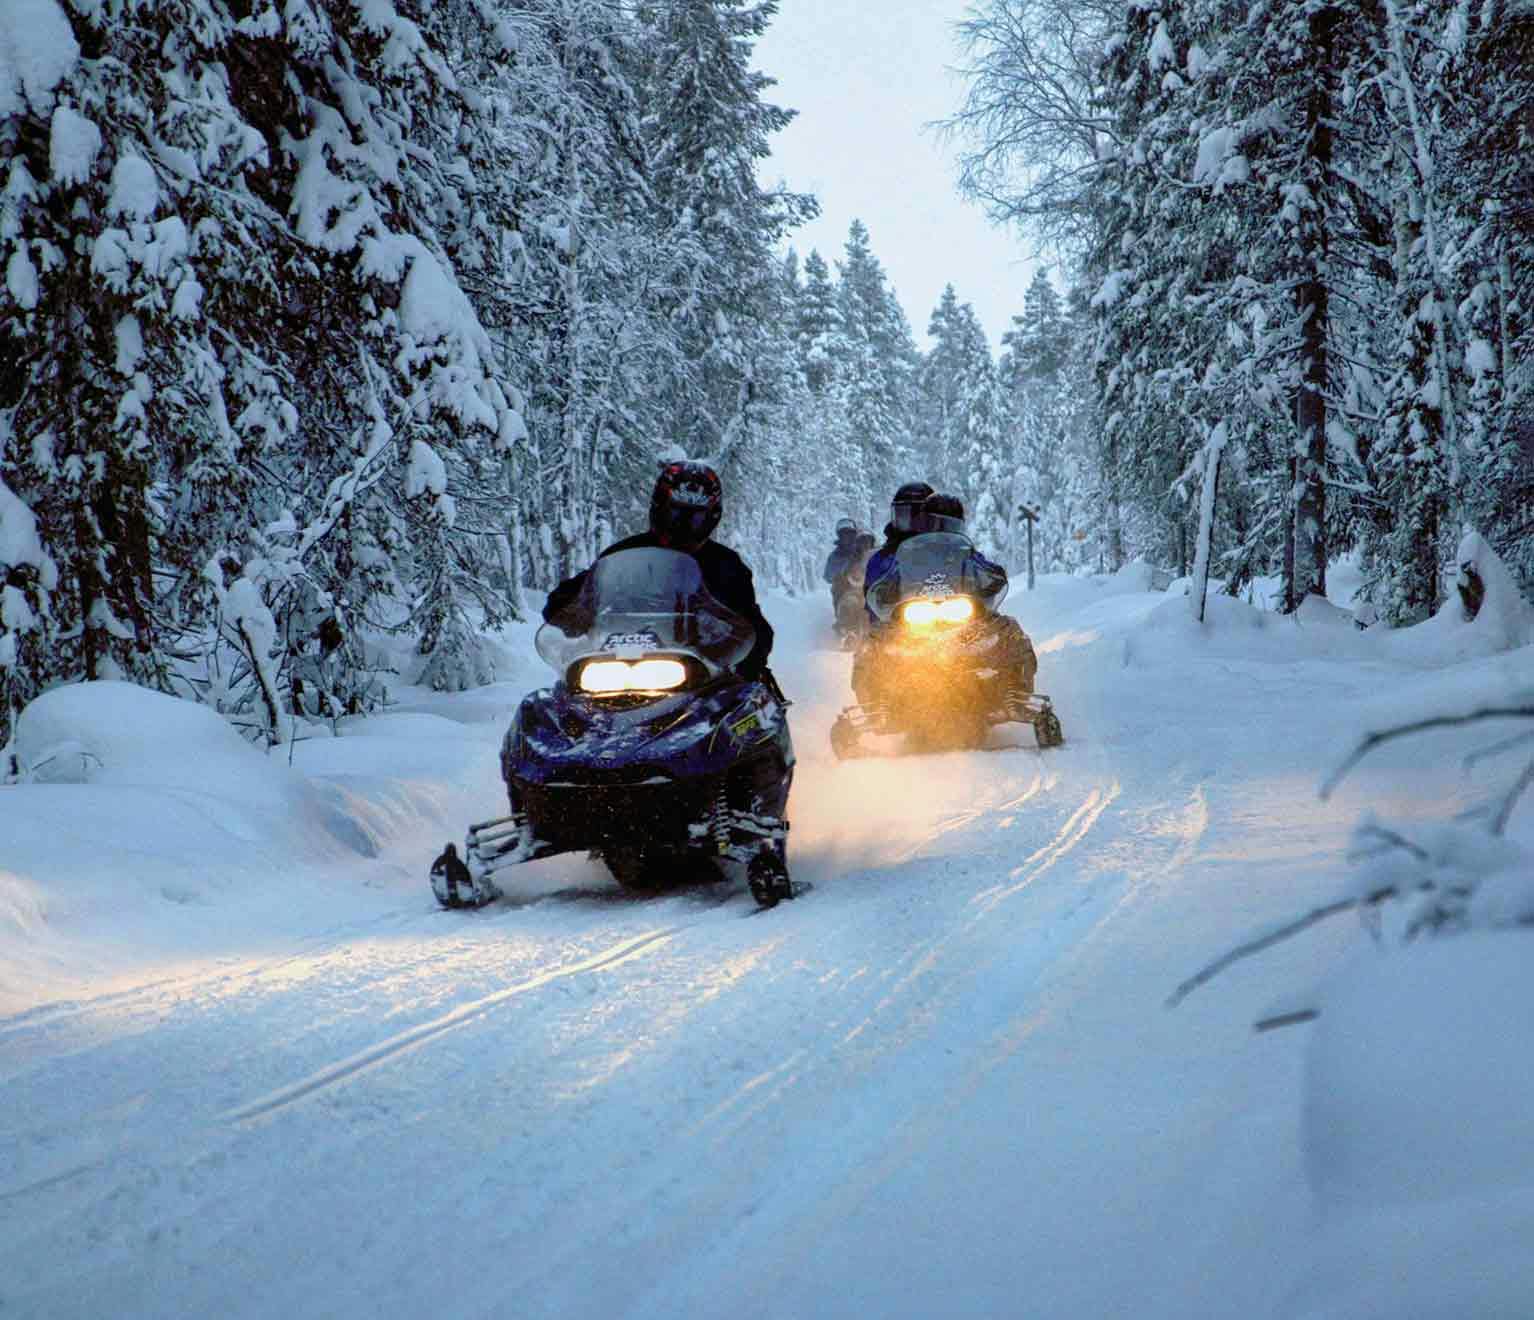 Snowmobile ride at night on a trail during snow